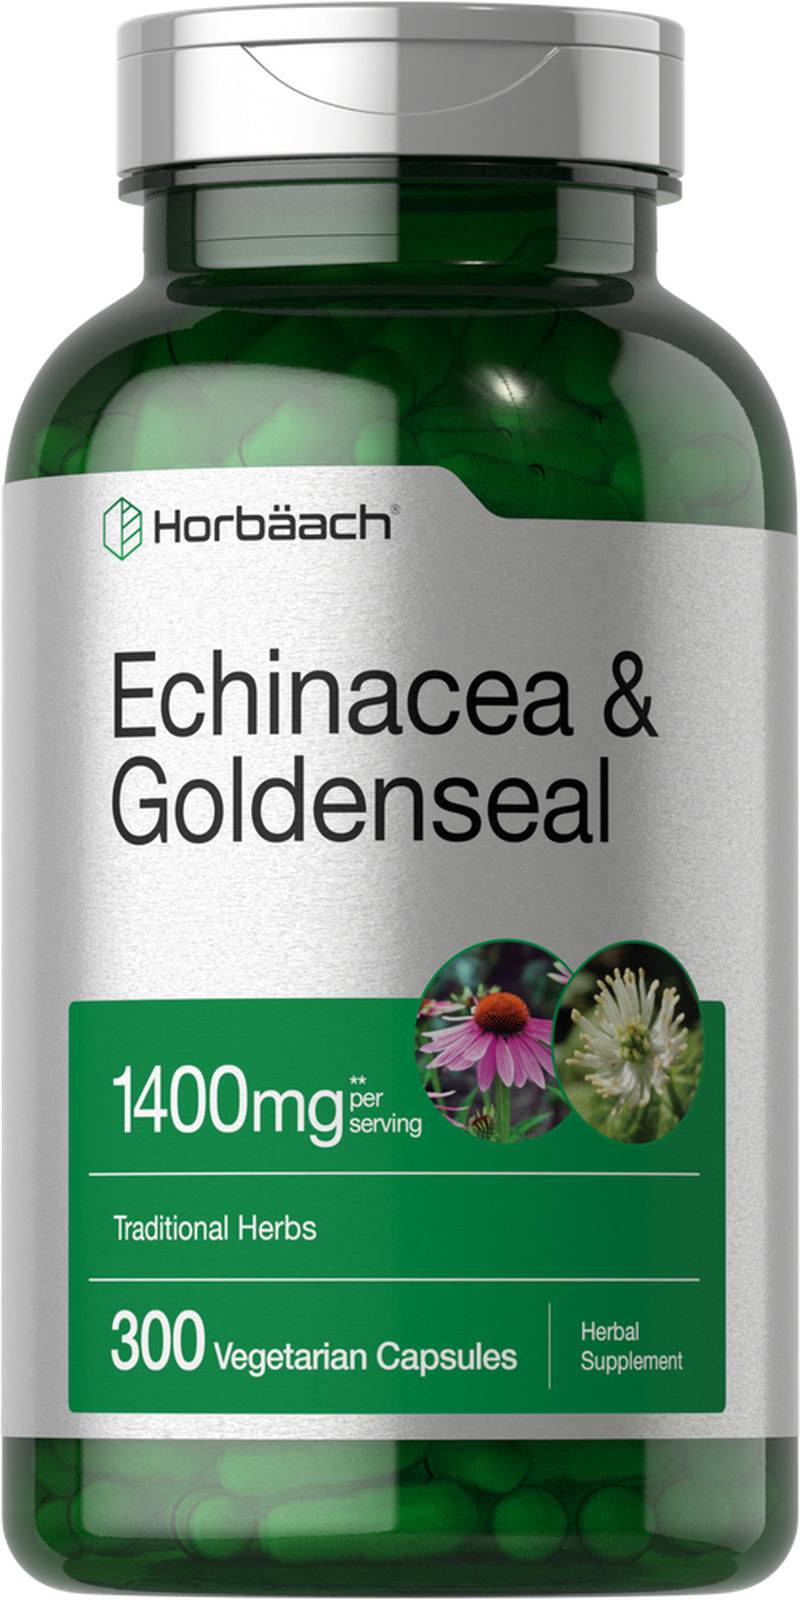 Echinacea Goldenseal Extract | 1400Mg | 300 Vegetarian Capsules | by Horbaach